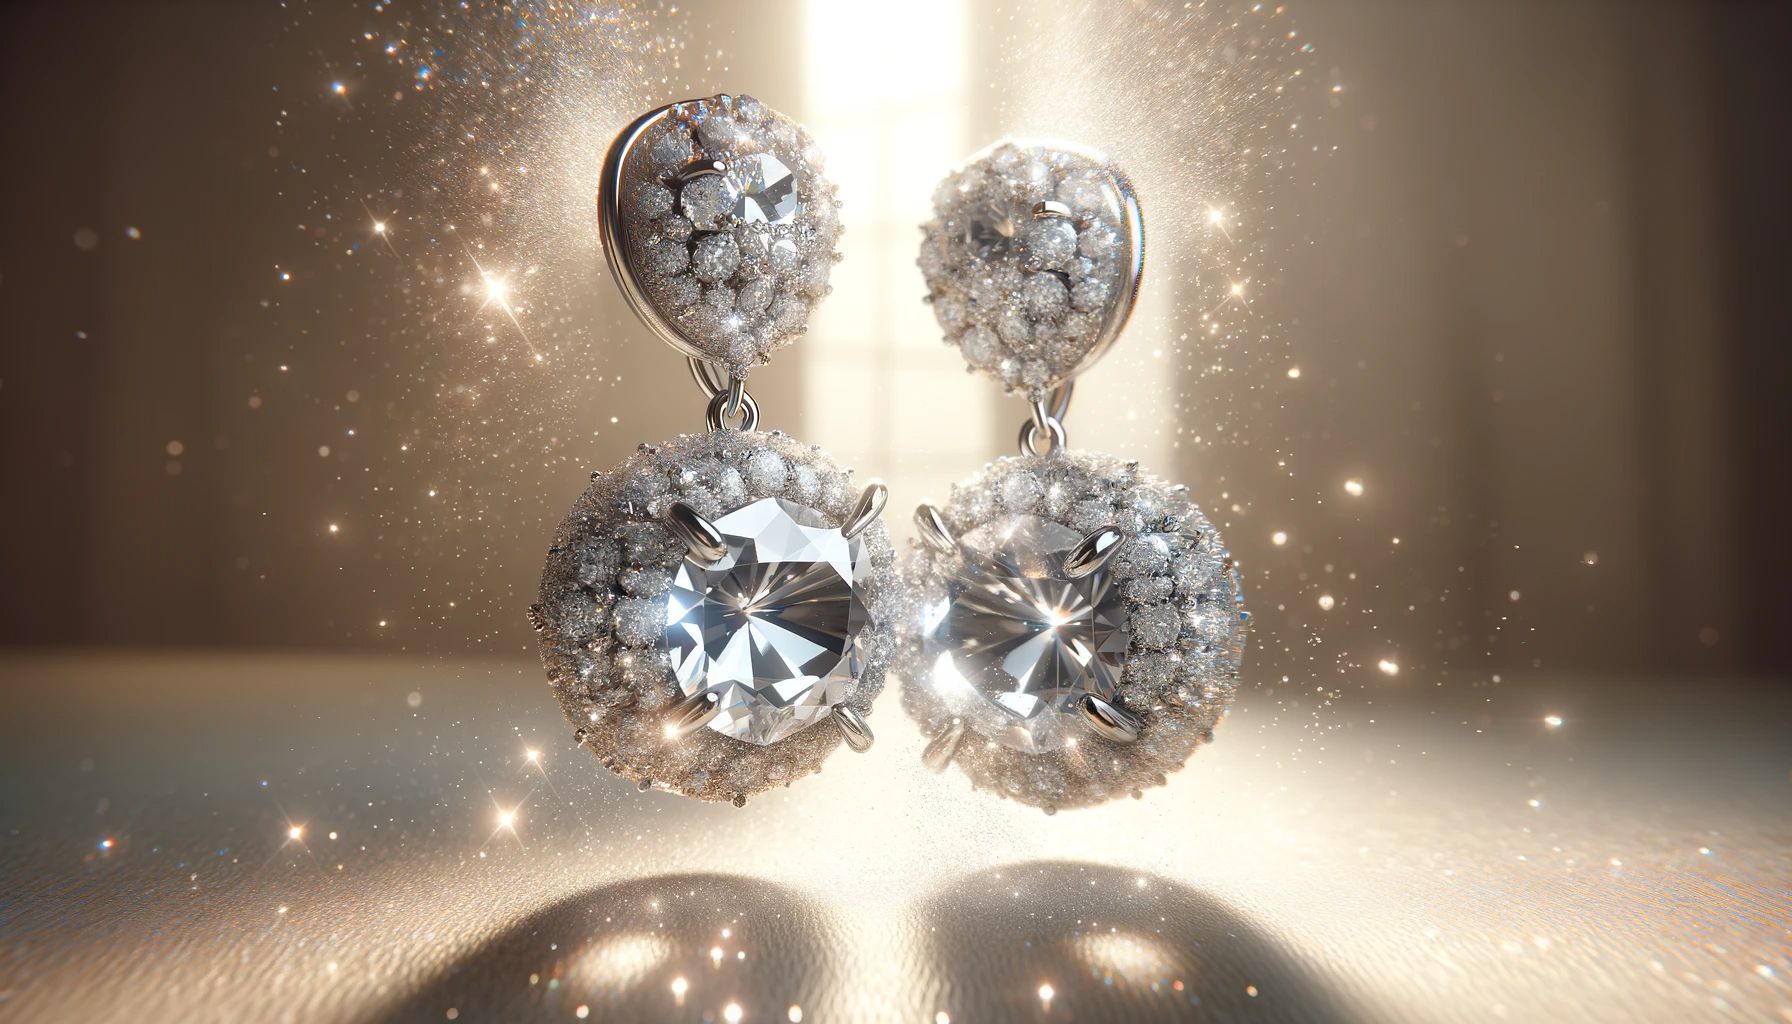 Diamond Drop Earrings Suspended In Mid-Air, Glistening With Reflections From Their Facets.